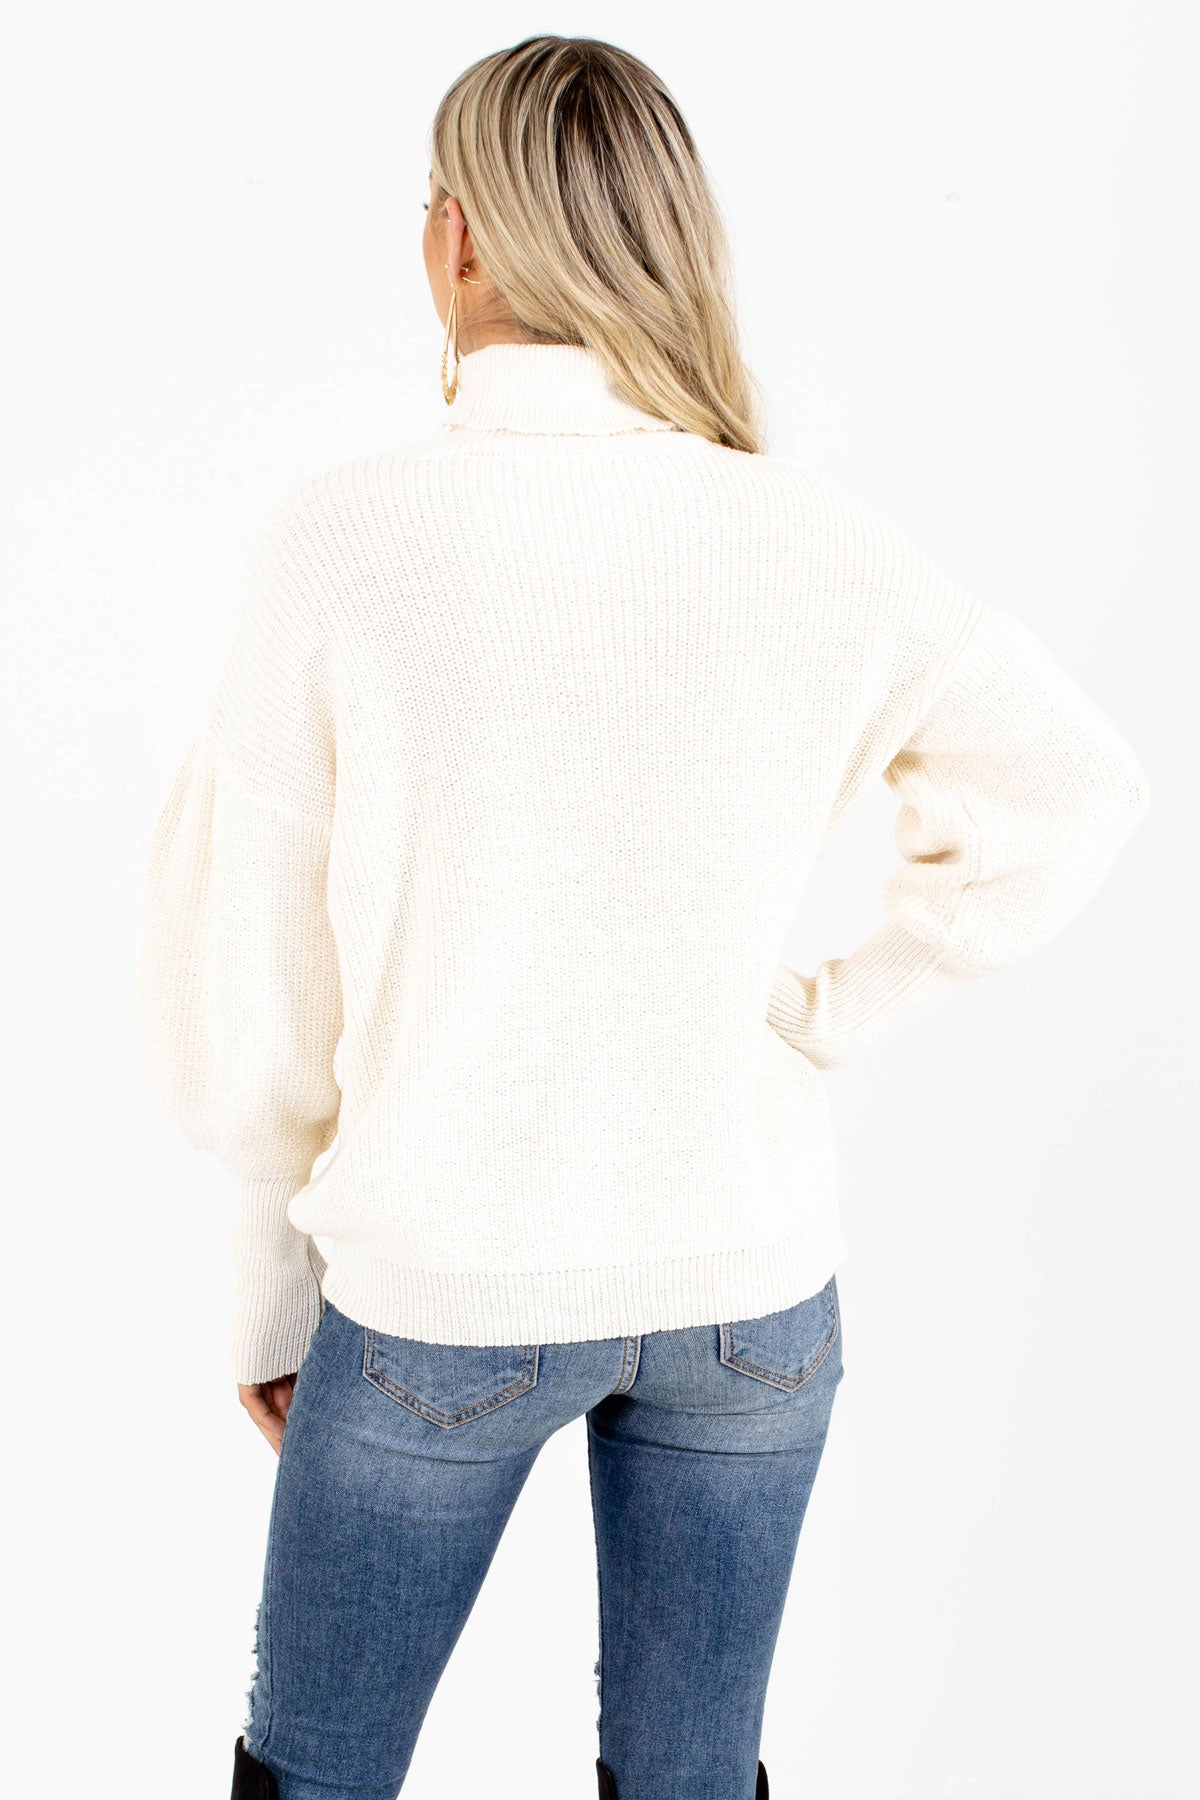 Cream Cute and Comfortable Boutique Sweaters for Women